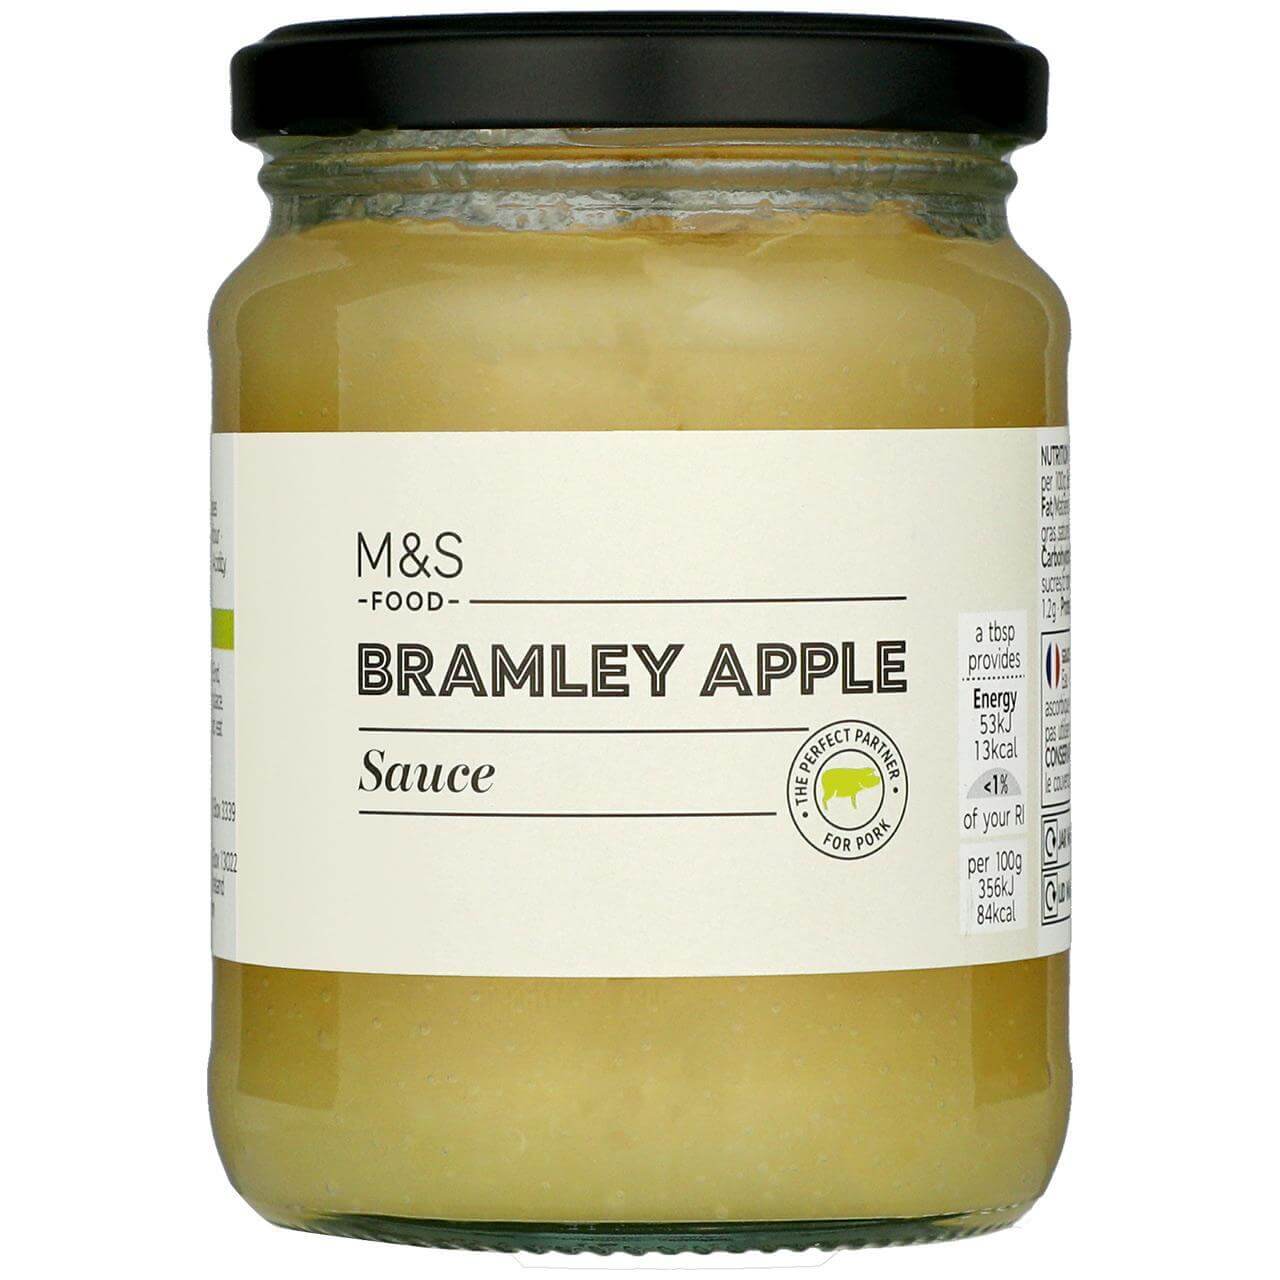 Image of M&S Bramley Apple Sauce by Marks & Spencer Food, designed, produced or made in the UK. Buying this product supports a UK business, jobs and the local community.